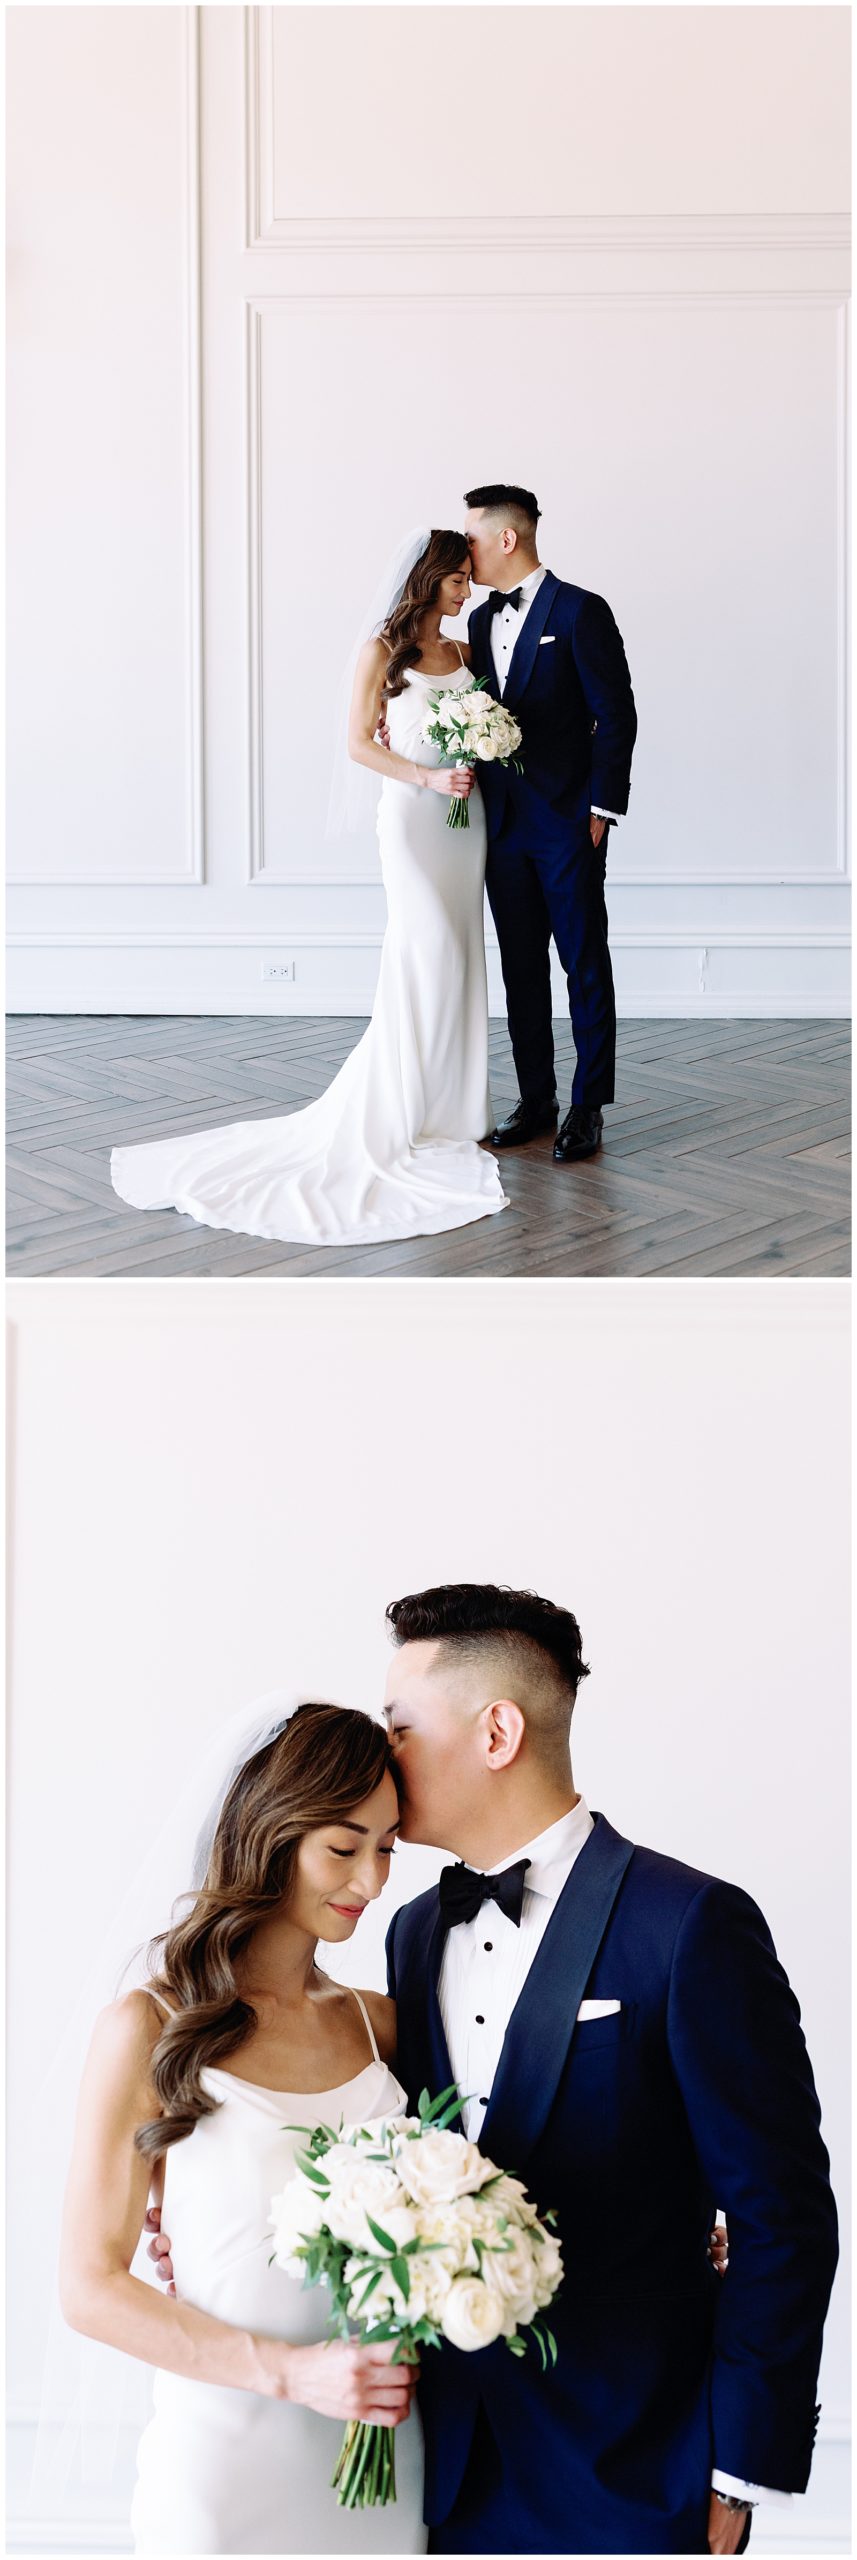 Bride and Groom Intimate Sweet Portrait Together Editorial Sophisticated Toronto at Arlington Estate Wedding Venue, Summer Intimate Elopement| Jacqueline James Photography for modern wild romantics